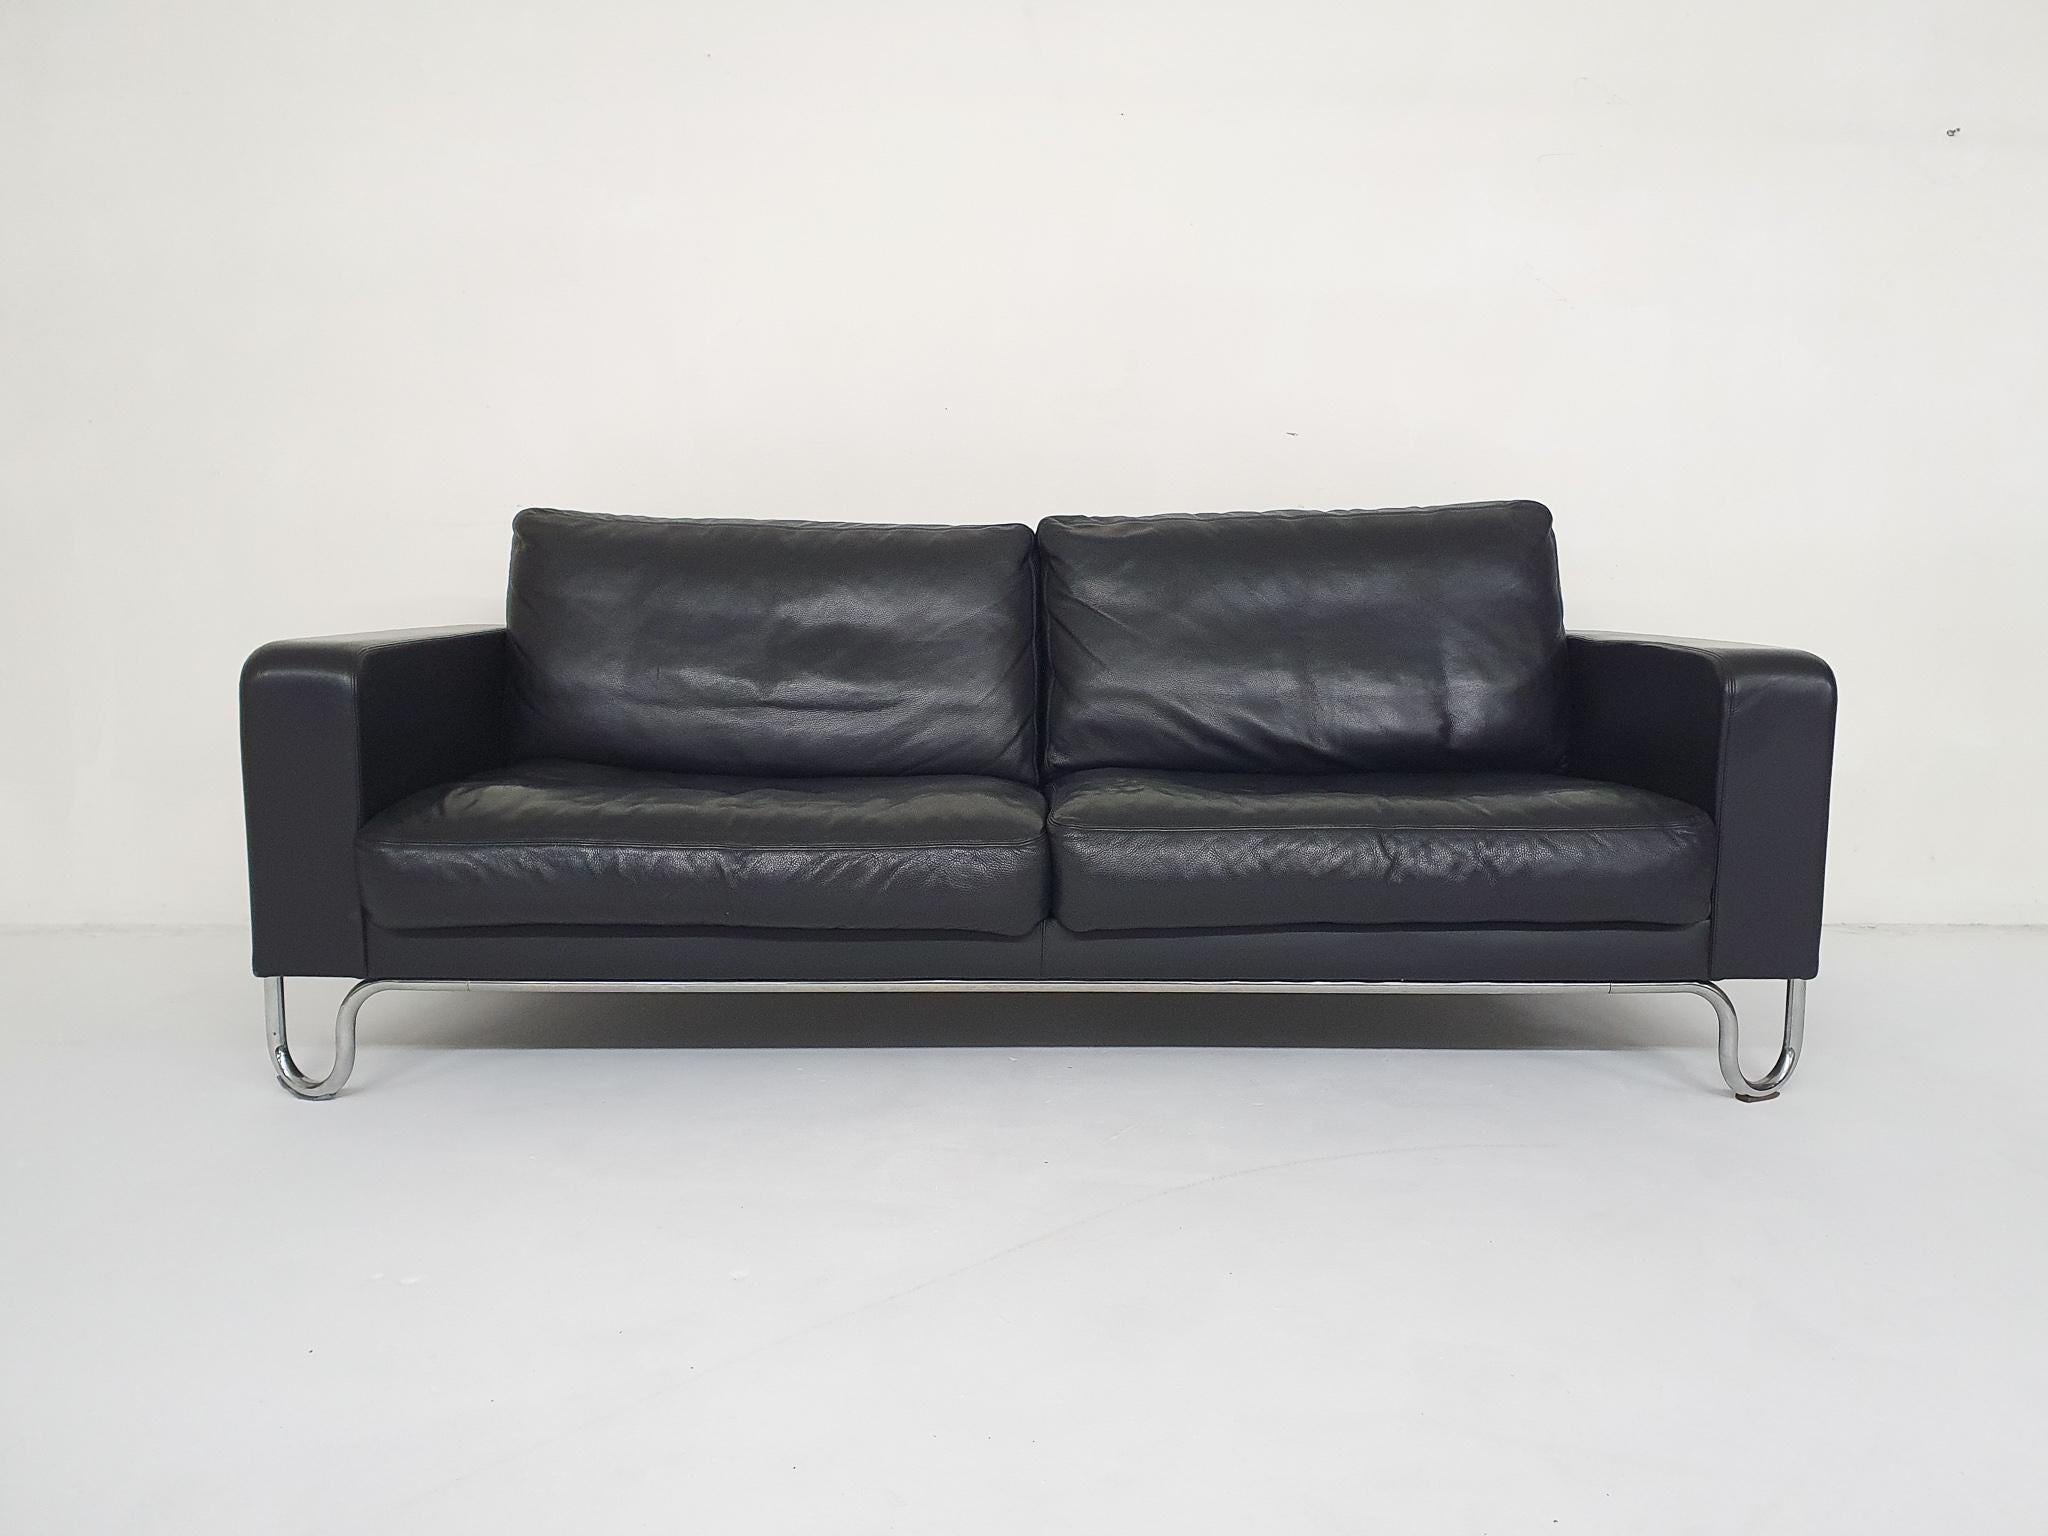 Black leather 3-seater sofa by W.H. Gispen, manufactured by Dutch Originals. Model AD B3.
On metal tubular frame, with four loose black leather cushions.

The leather is in good condition. The cushions might need some extra filling if desired.